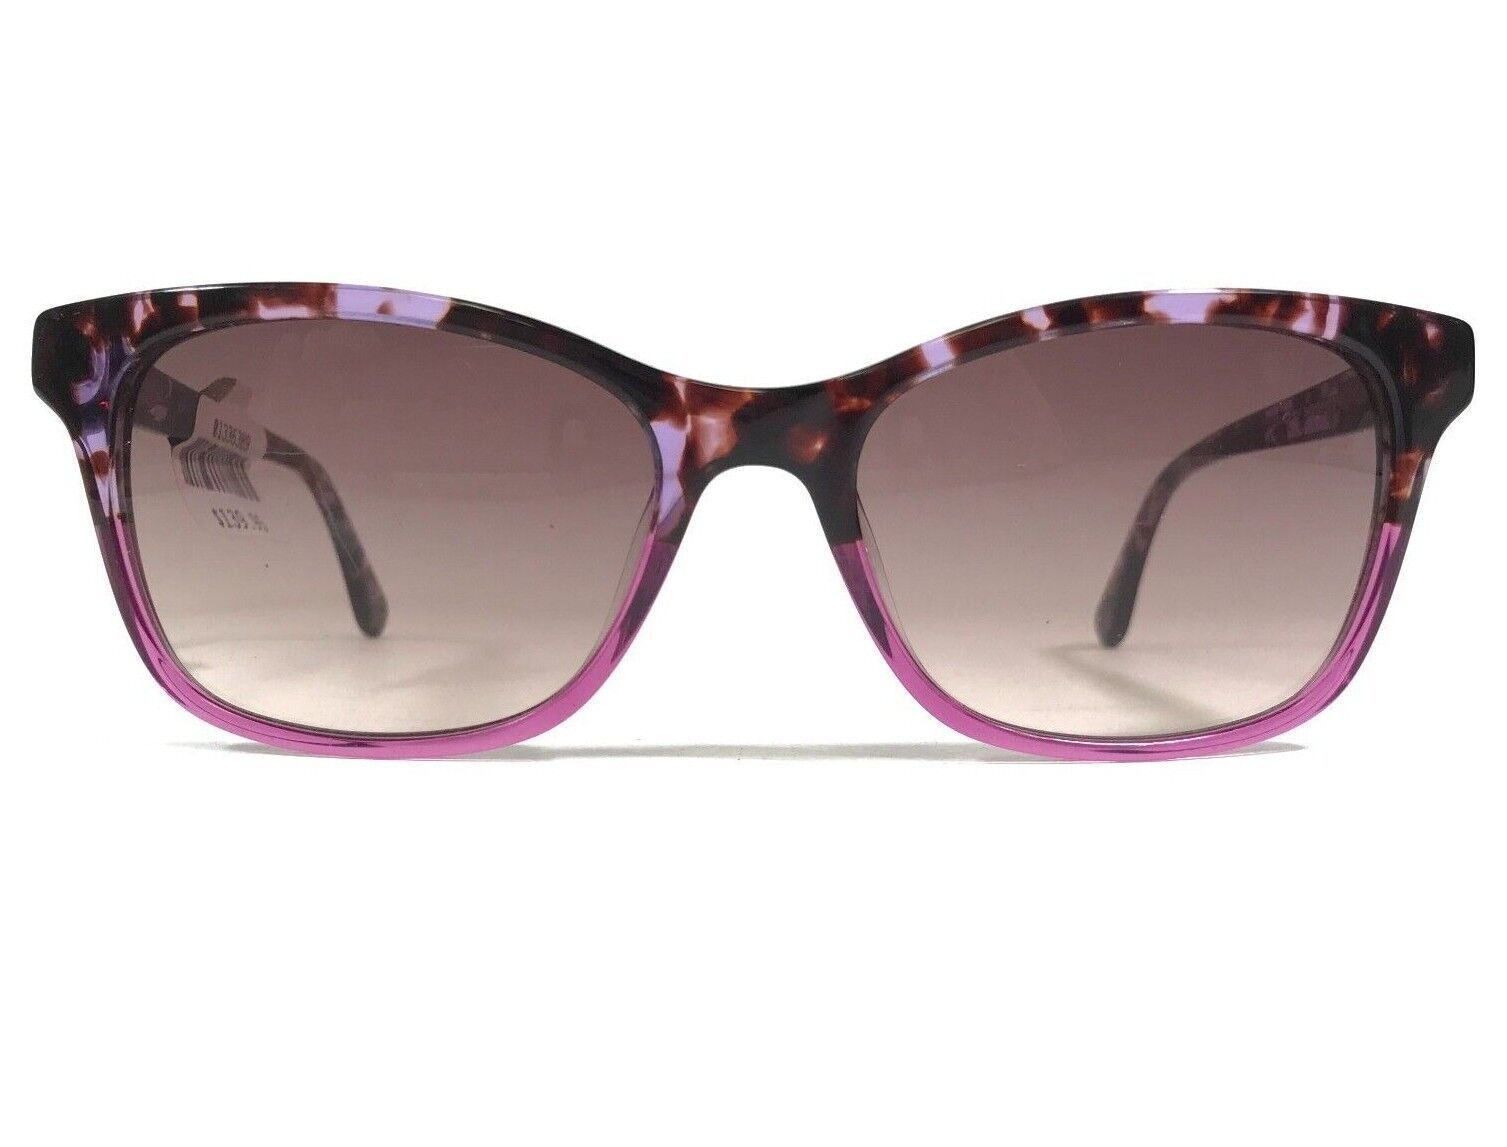 Primary image for Candies Sunglasses CA1023 83F Purple Square Frames with purple Lenses 54-17-140